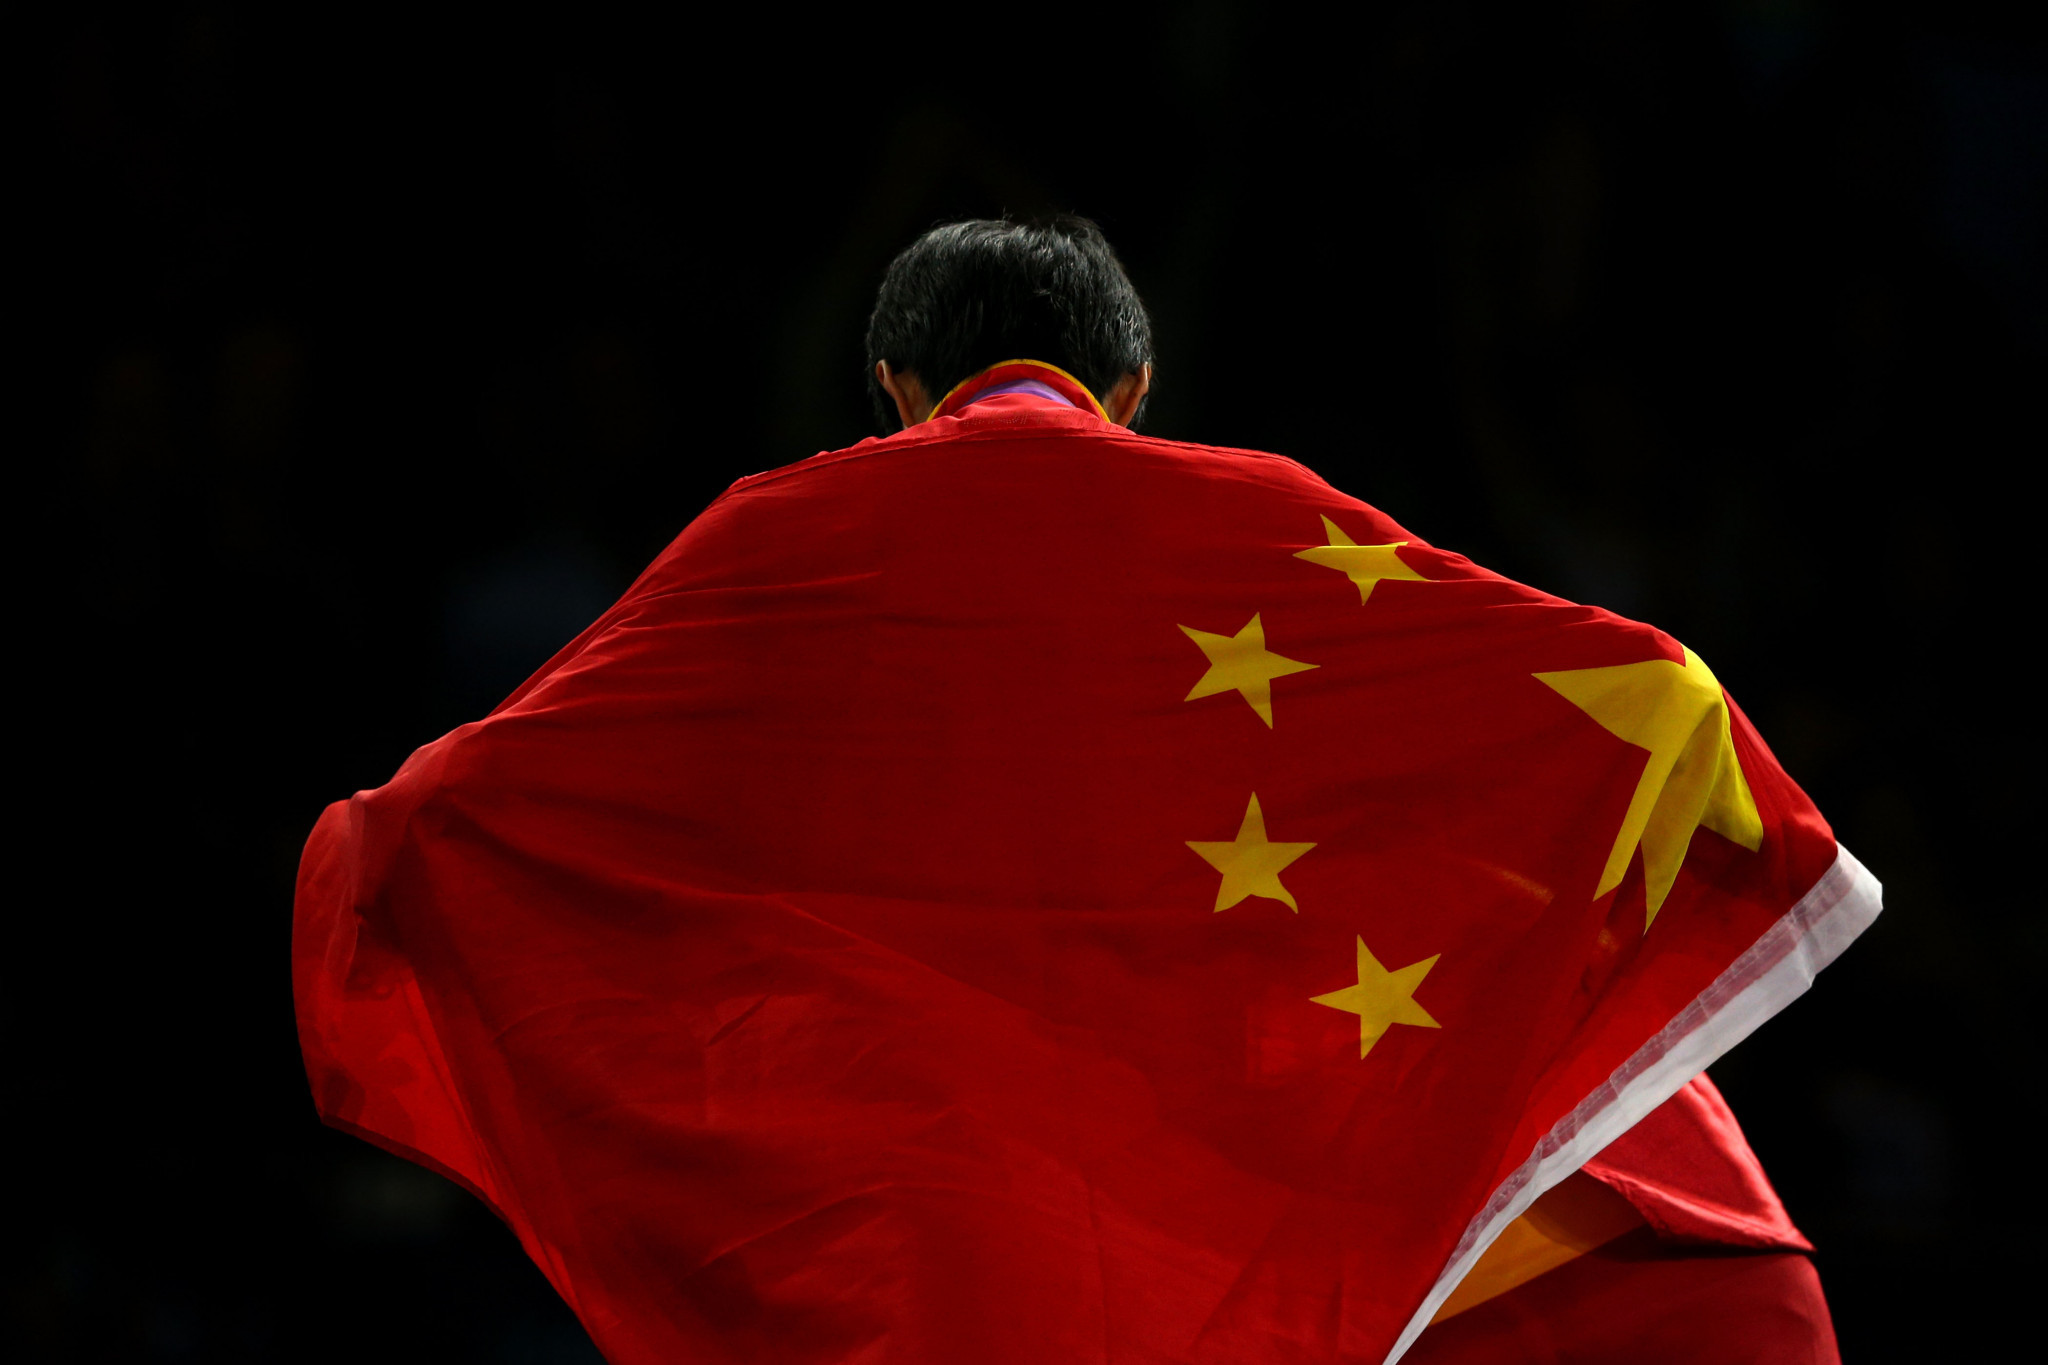 More than 300 athletes took part in the Chinese Taekwondo Championships ©Getty Images